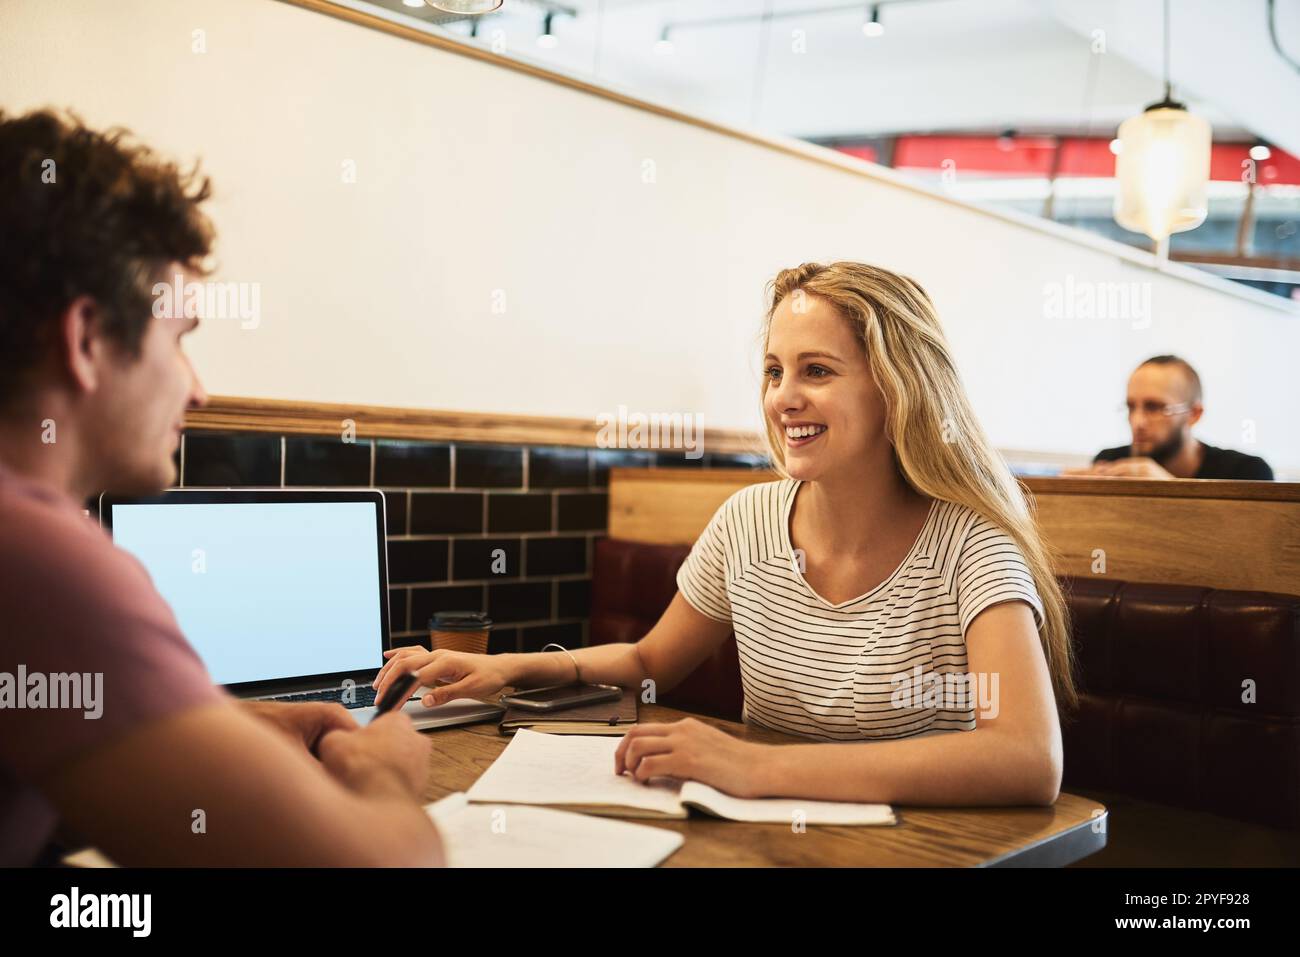 Technology and tutoring elevate her studies. two happy young students having a study session at their favorite cafe. Stock Photo